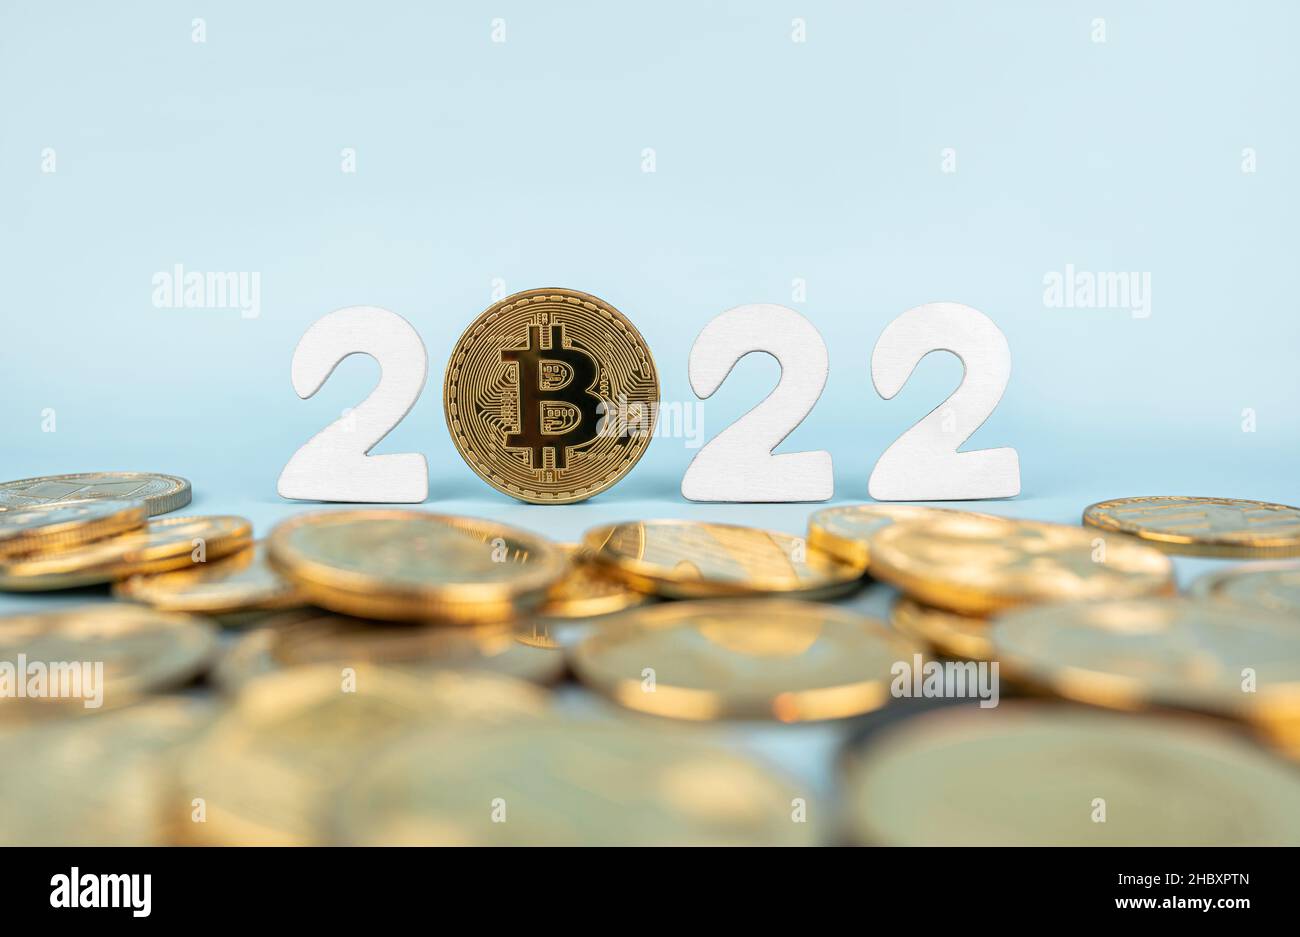 Bitcoin 2022 price prediction concept. Btc coin standing next to cryptocurrency tokens and year numbers on blue background. Close-up, soft focus. Stock Photo